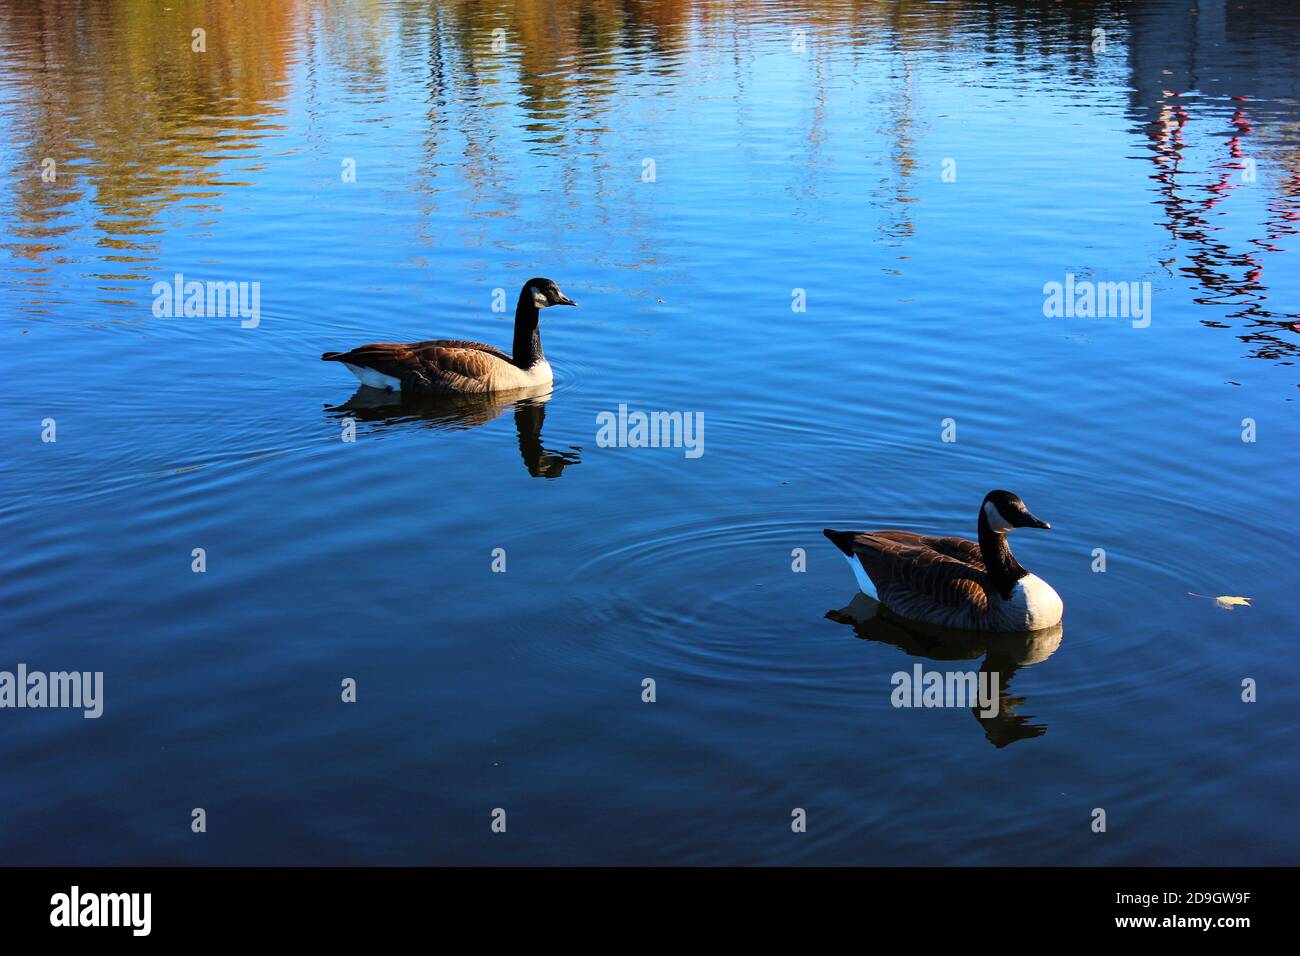 A beautiful view of Canadian wildlife (birds) amidst their natural habitat. Stock Photo